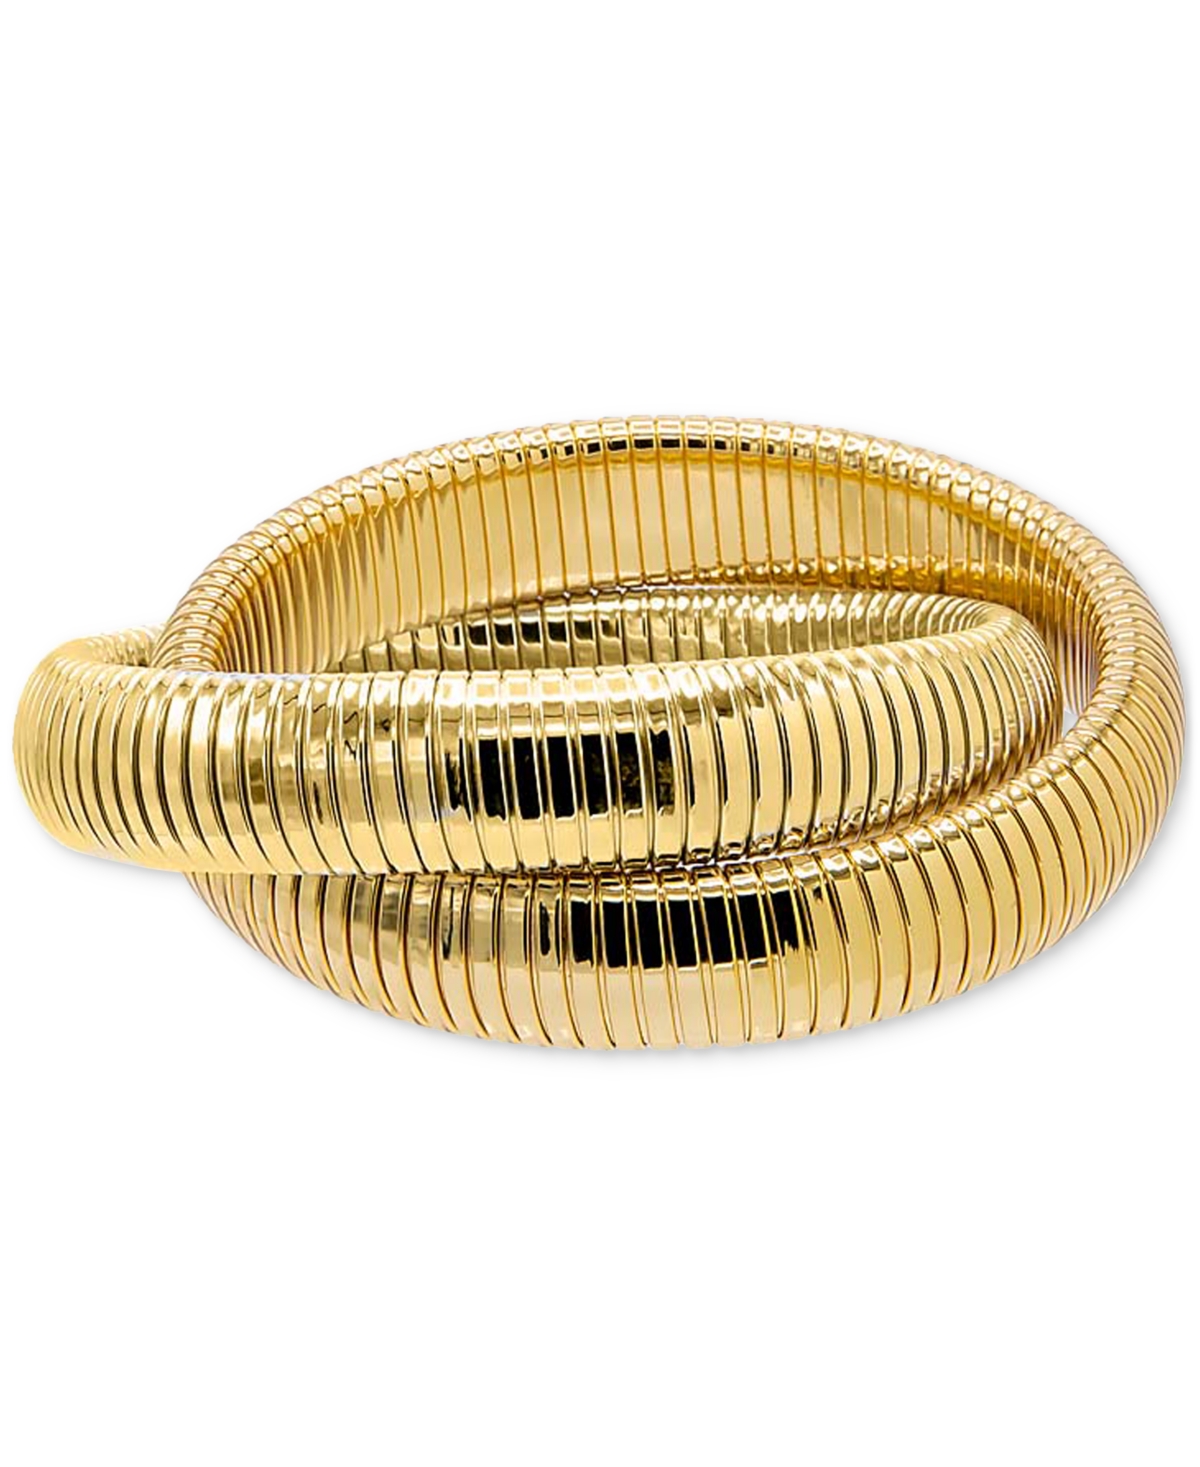 Chunky Intertwined Snake Chain Bracelet - Gold